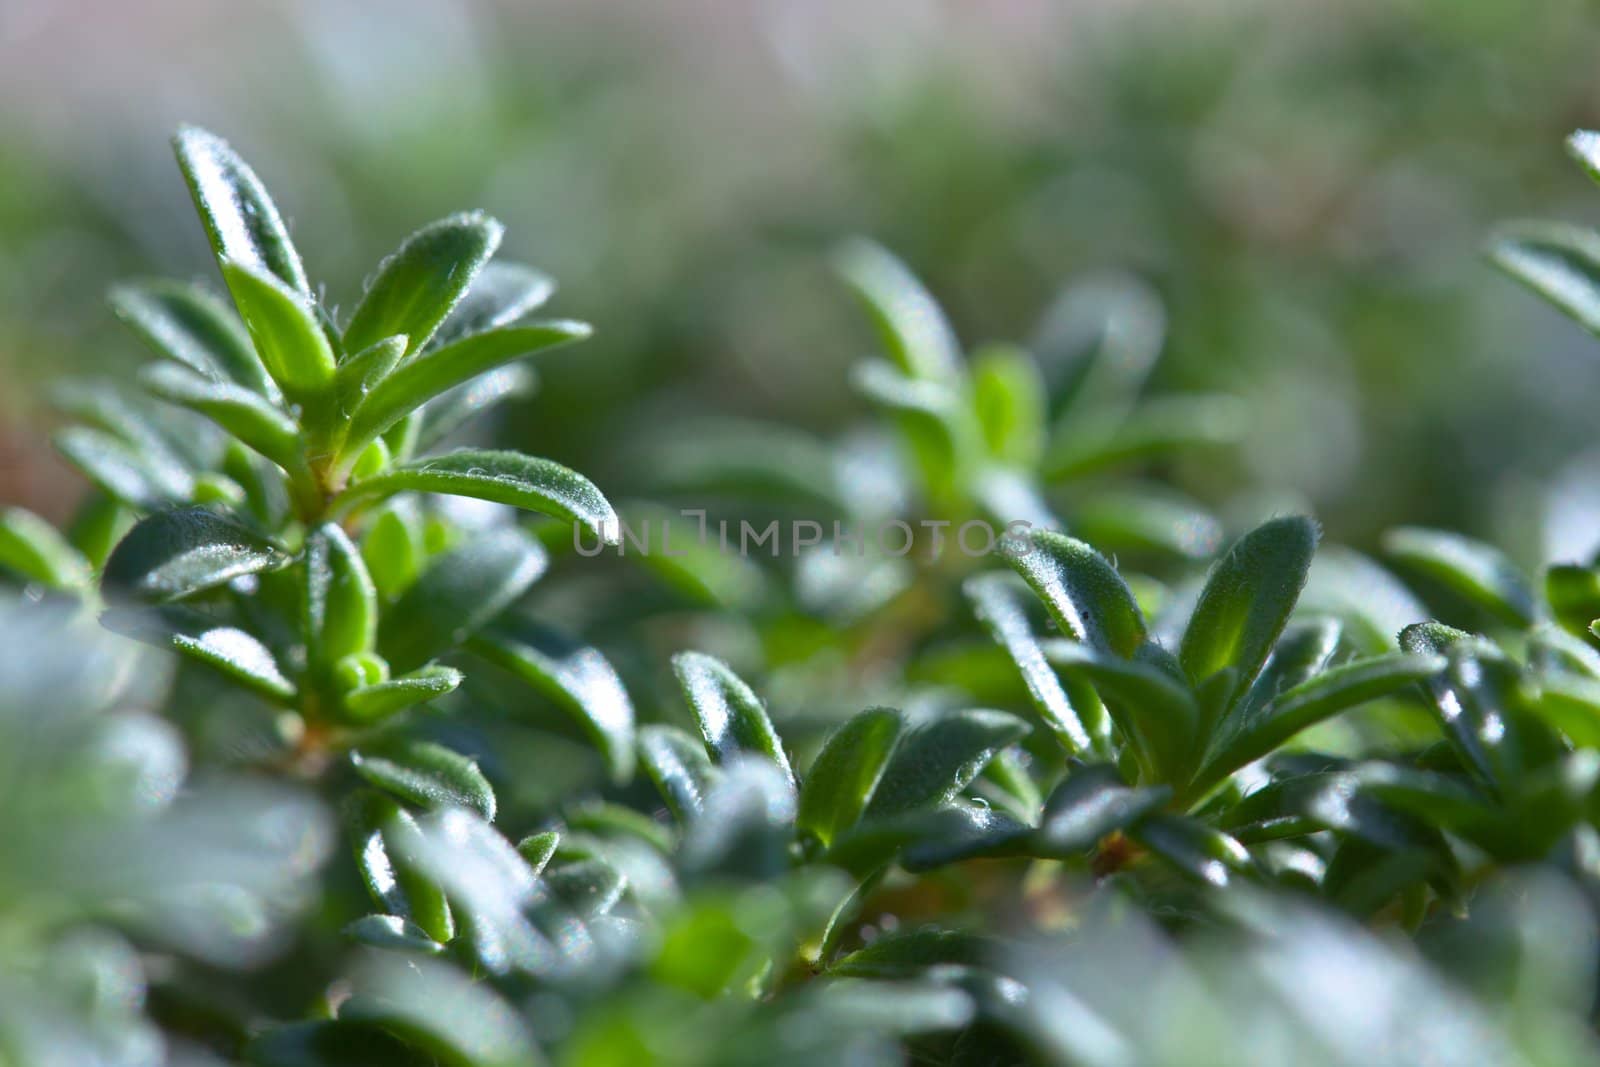 Thyme In the Sun by RachelD32